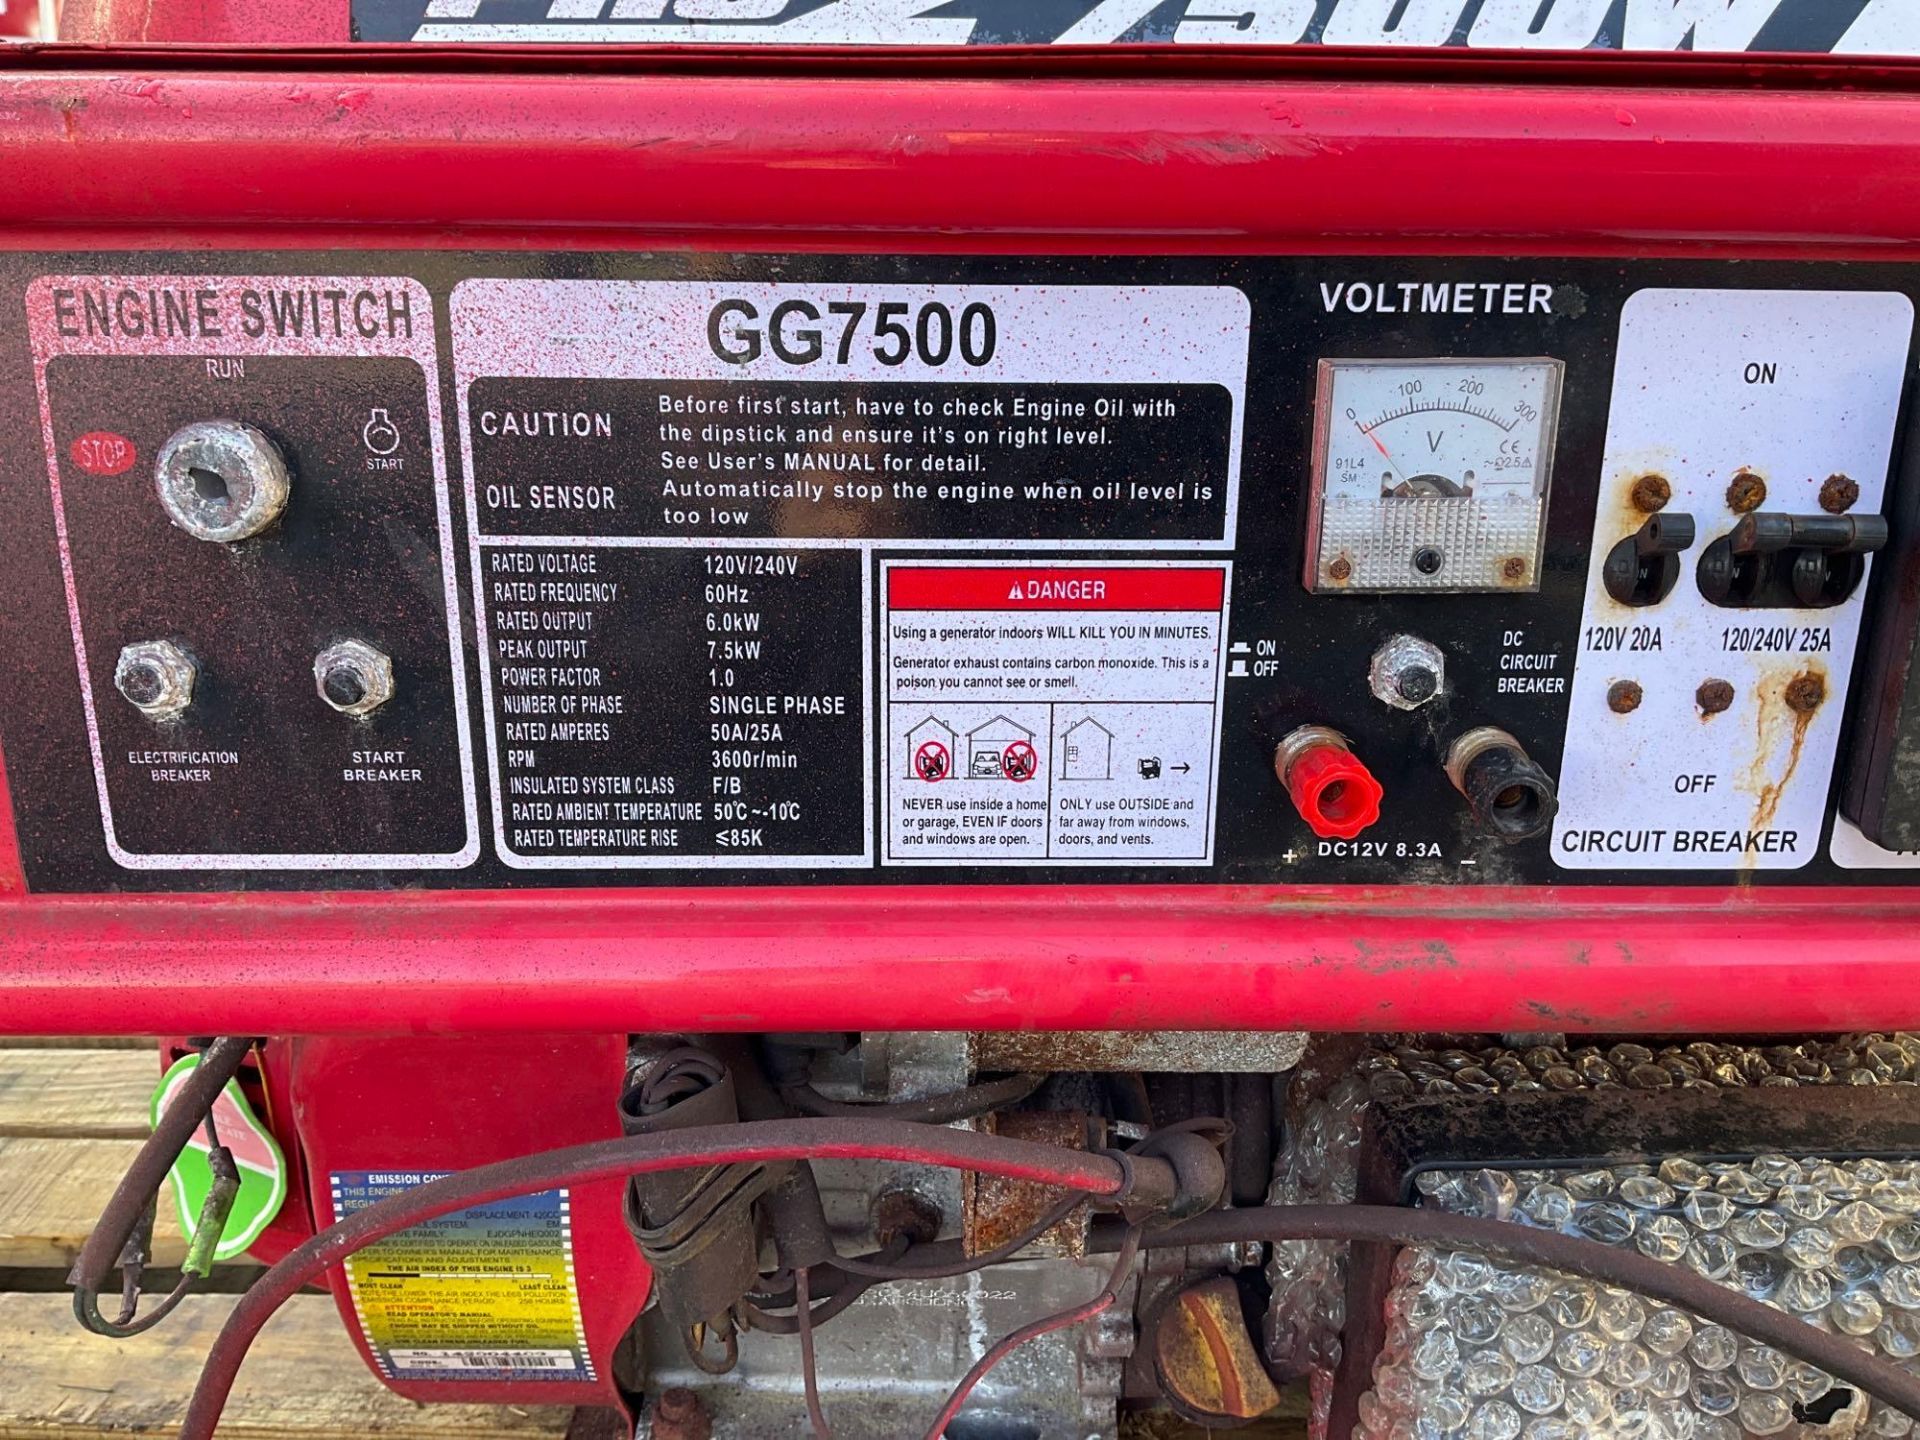 GENTRON PRO2 7500W GENERATOR MIDEL GG7500, GAS POWERED, APPROX 120/240 RATED VOLTS, SINGLE PHASE, - Image 9 of 21